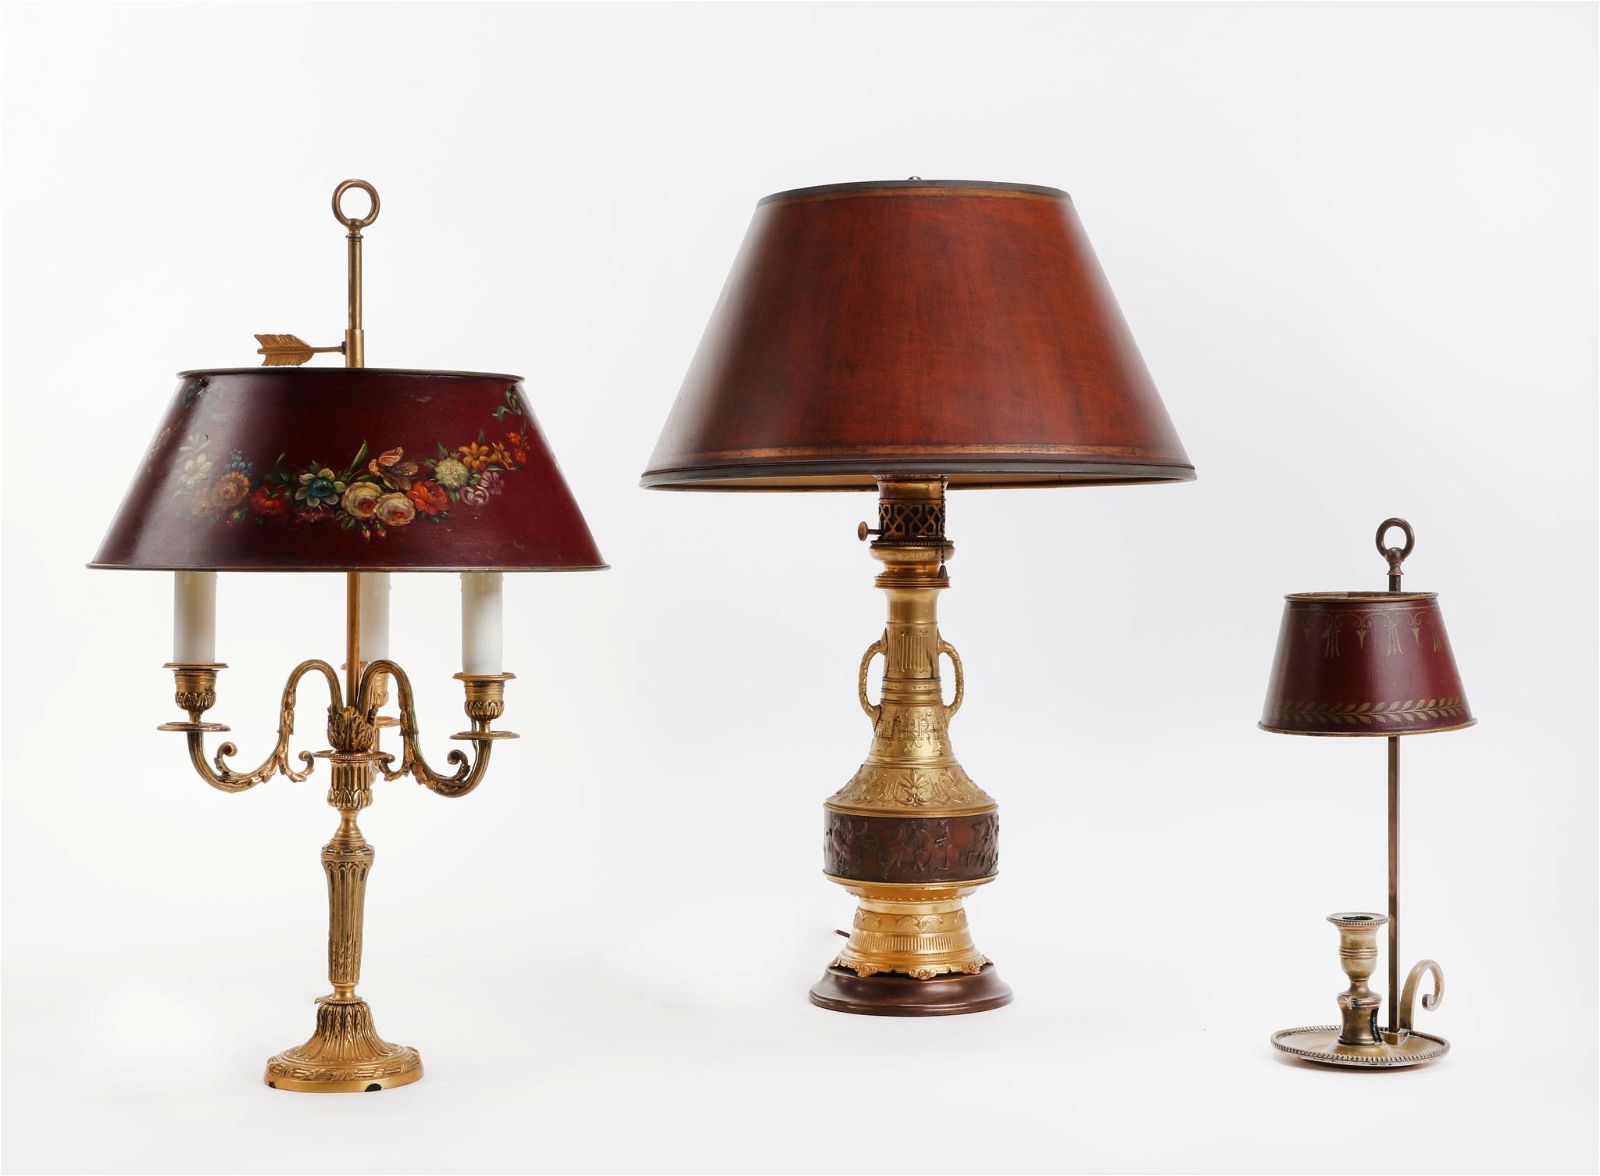 THREE FRENCH BRONZE AND TOLE LAMPSThree